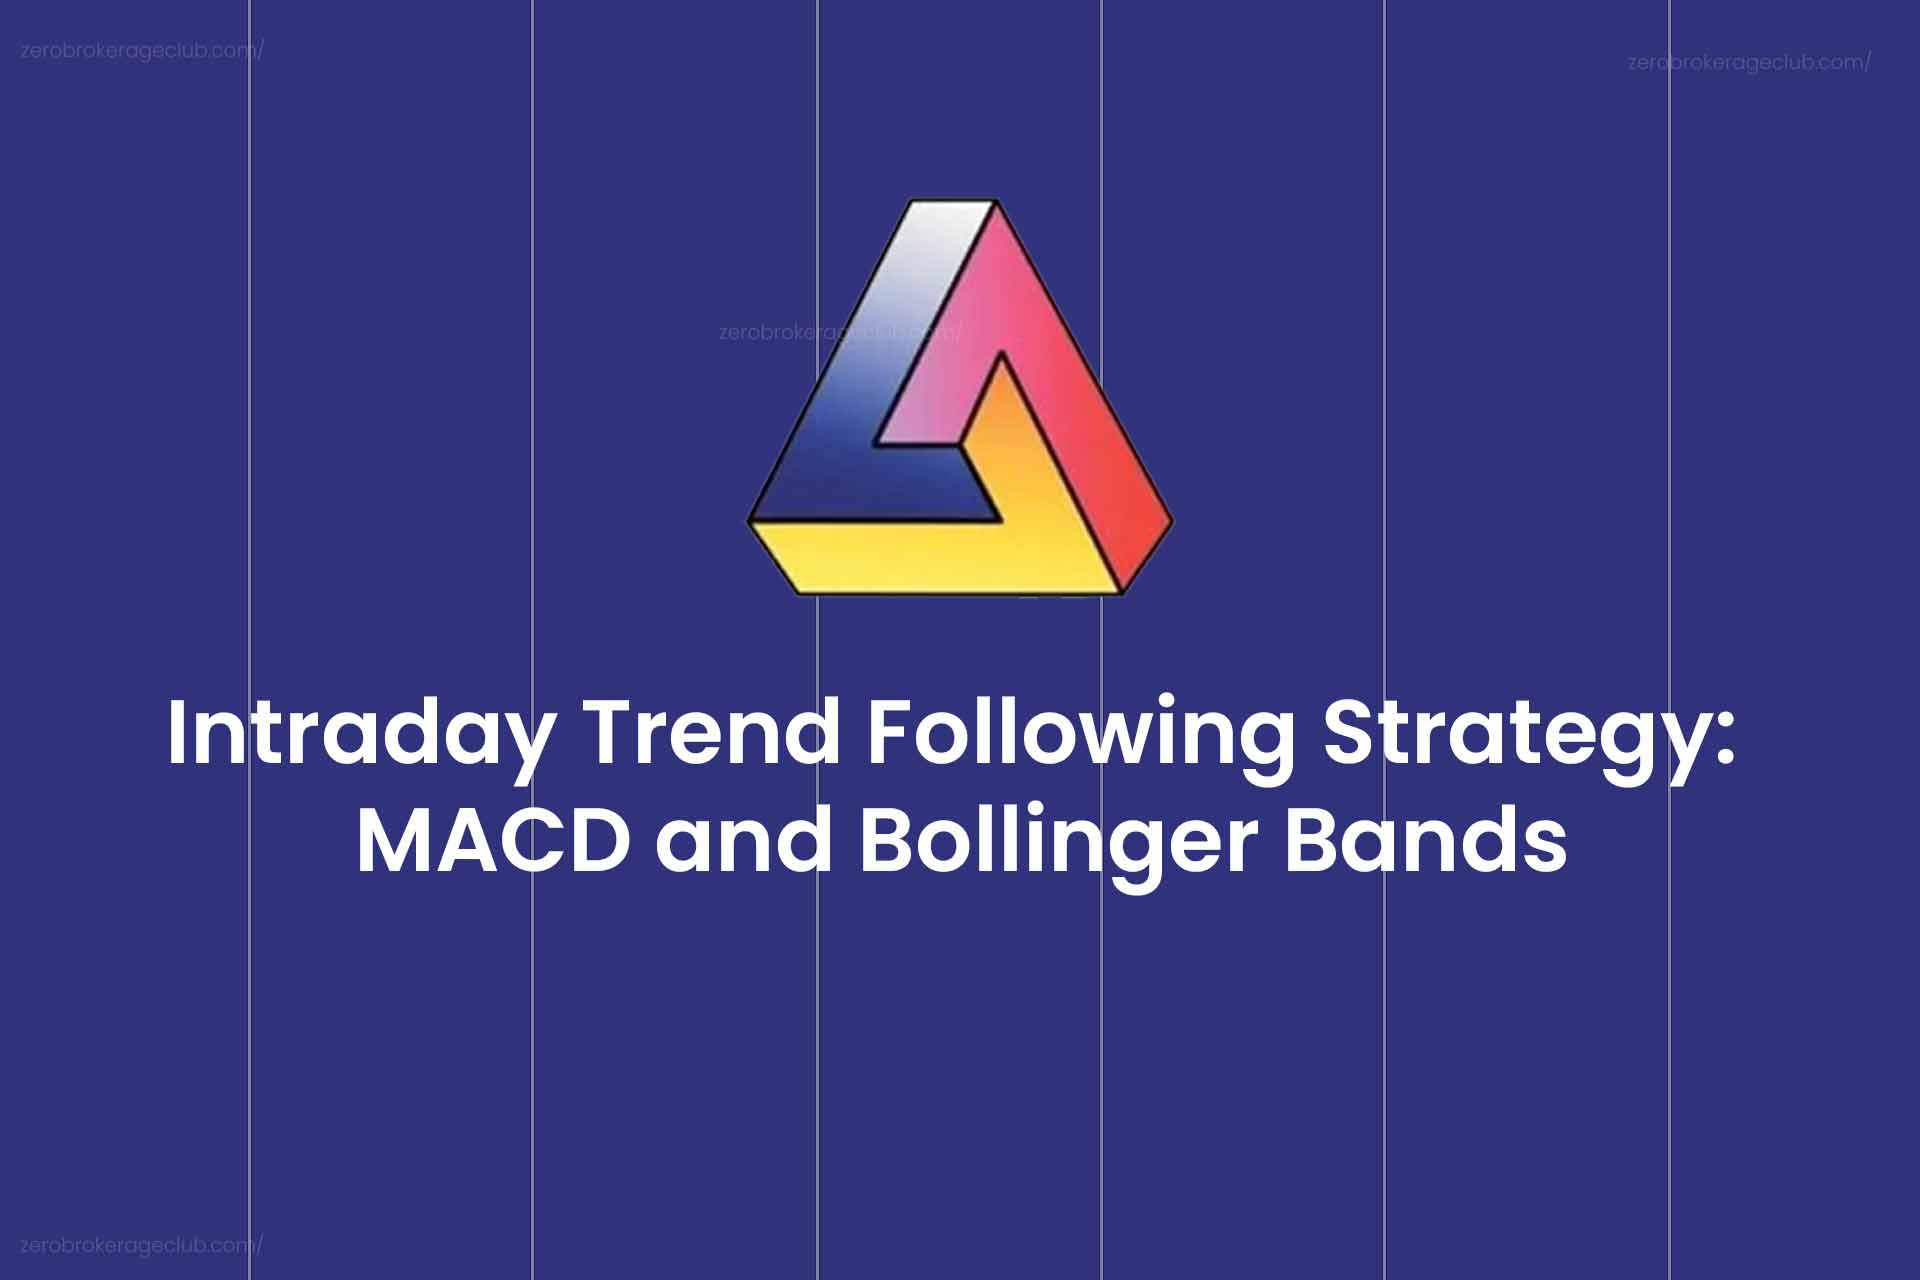 Intraday Trend Following Strategy: MACD and Bollinger Bands